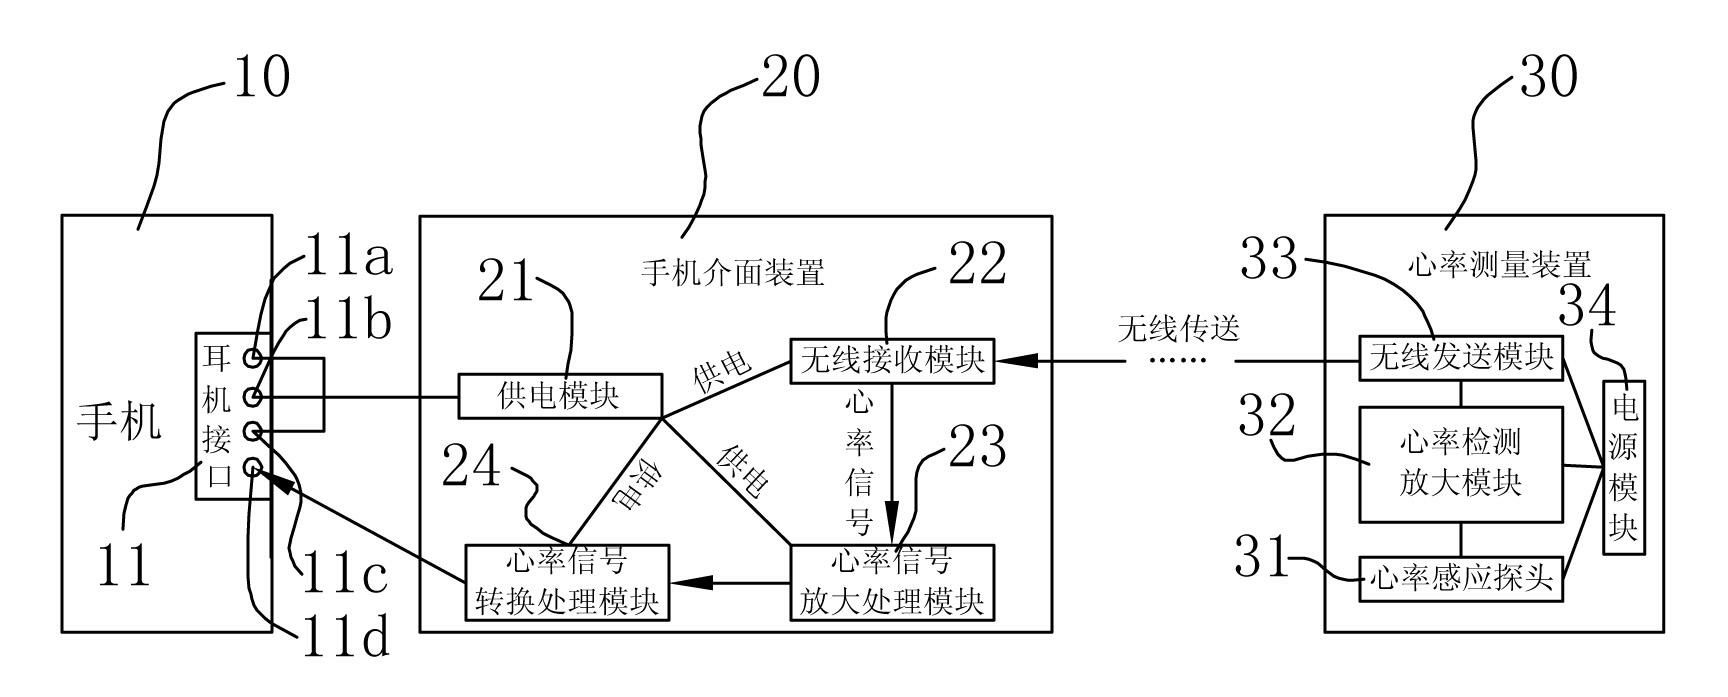 Mobile-phone-based heart rate monitoring device